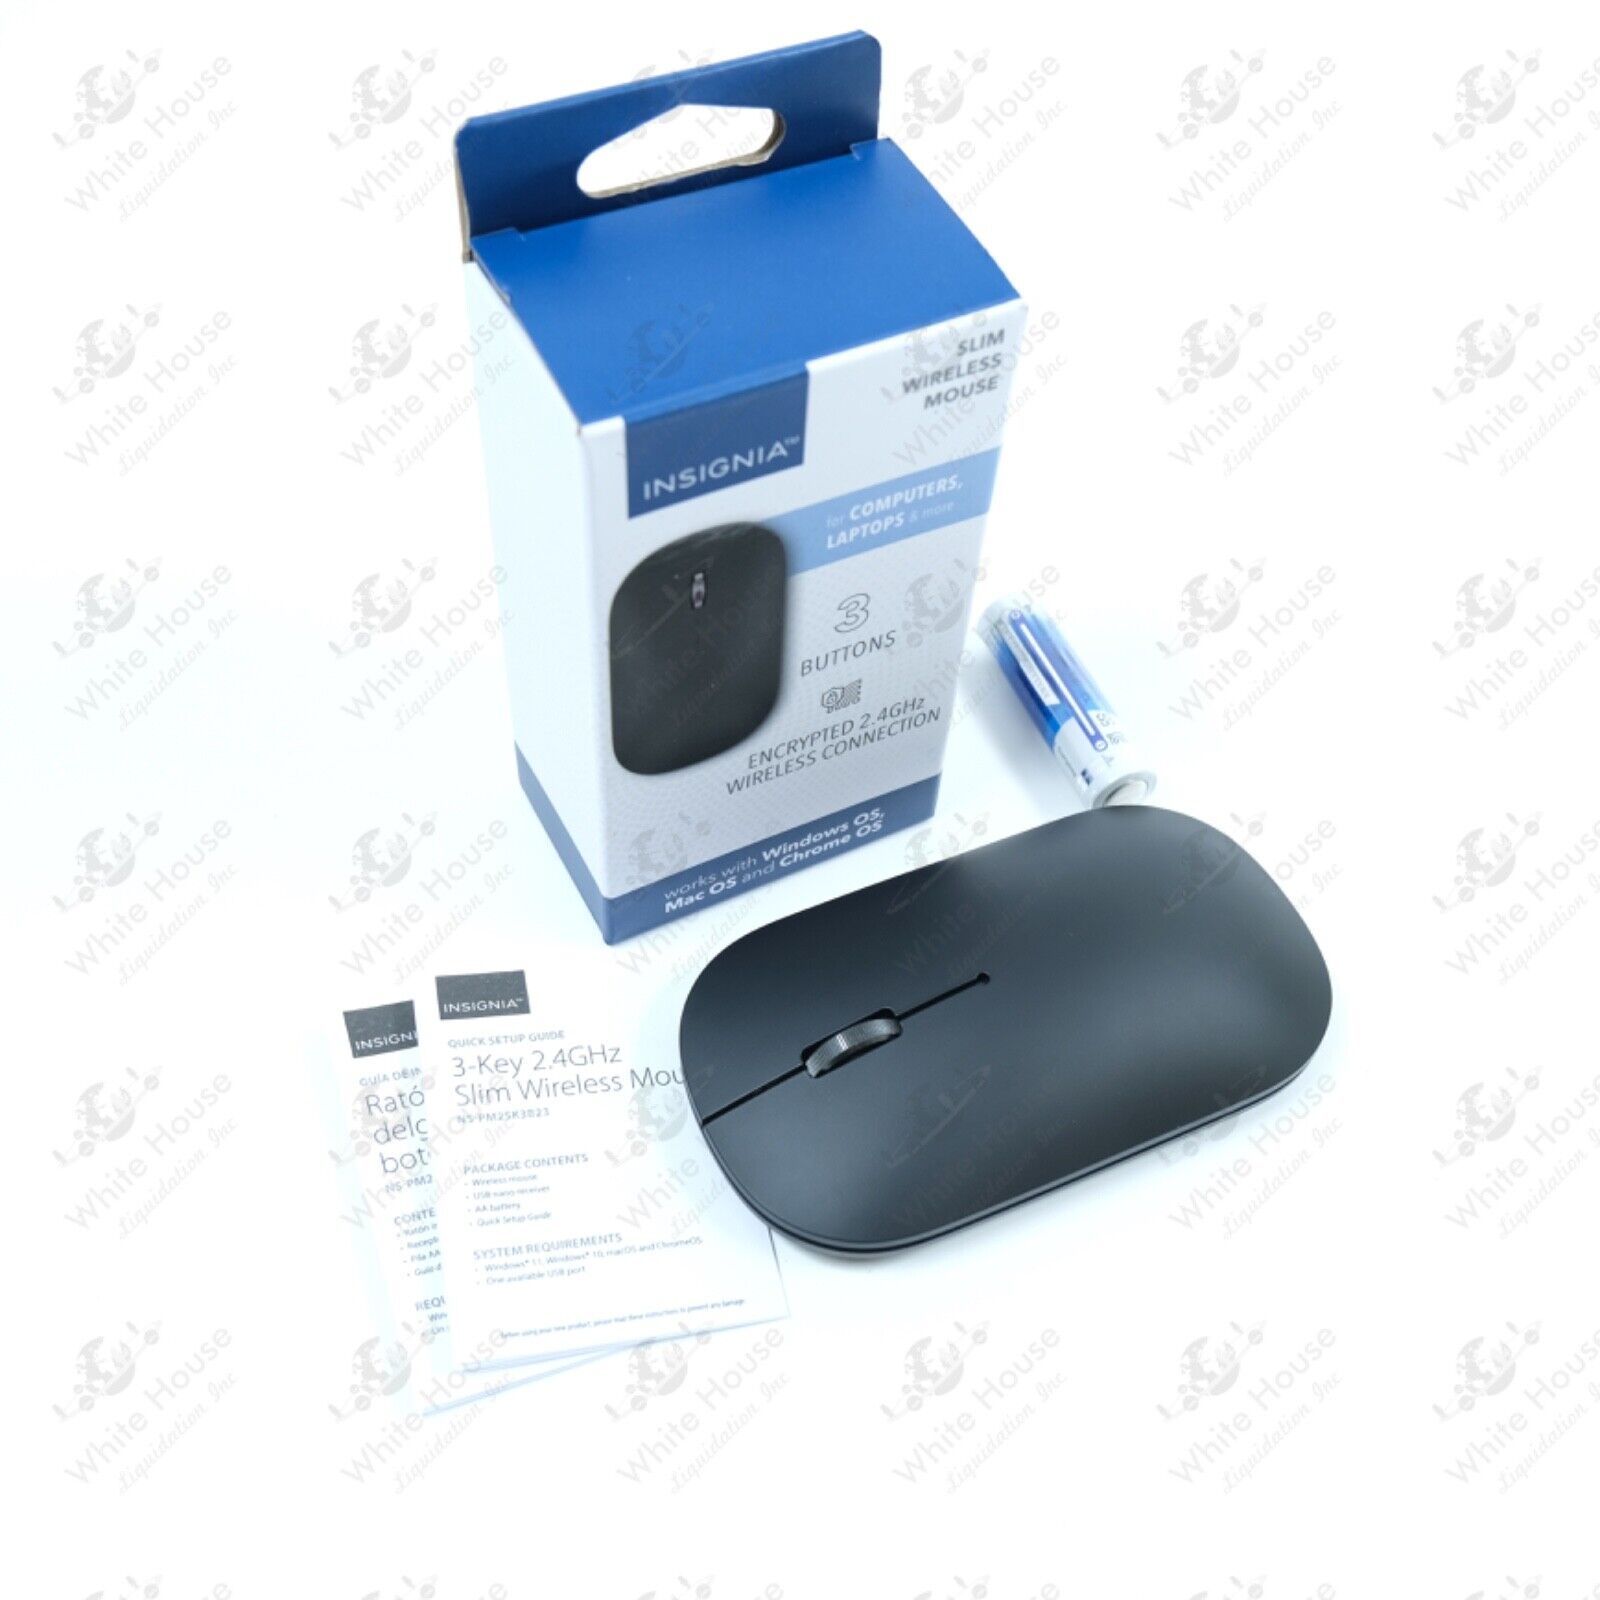 Insignia - Wireless Optical 3-Button Mouse - Black